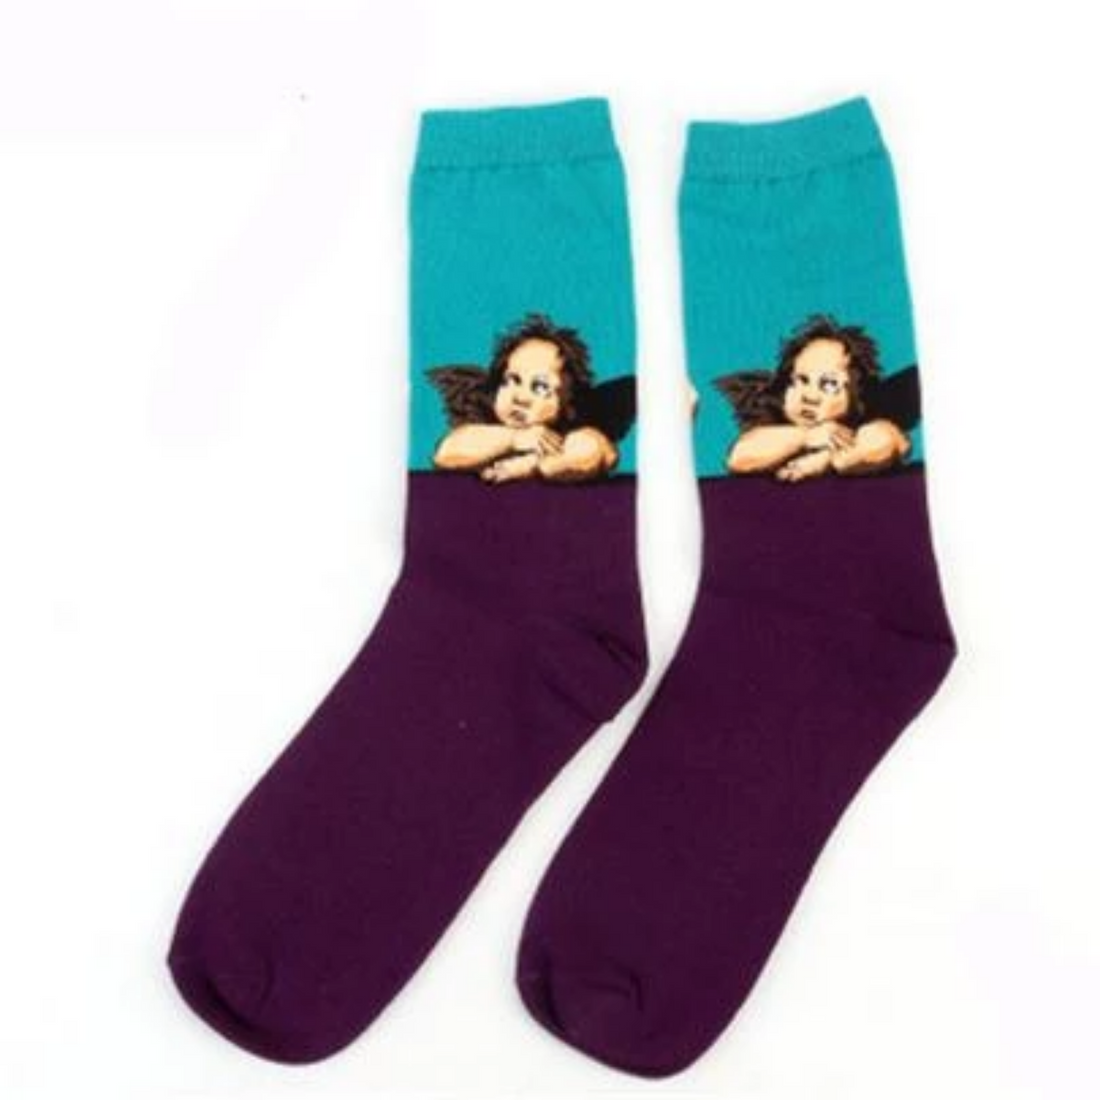 Women's Autumn/Winter Casual Cotton Socks With Print